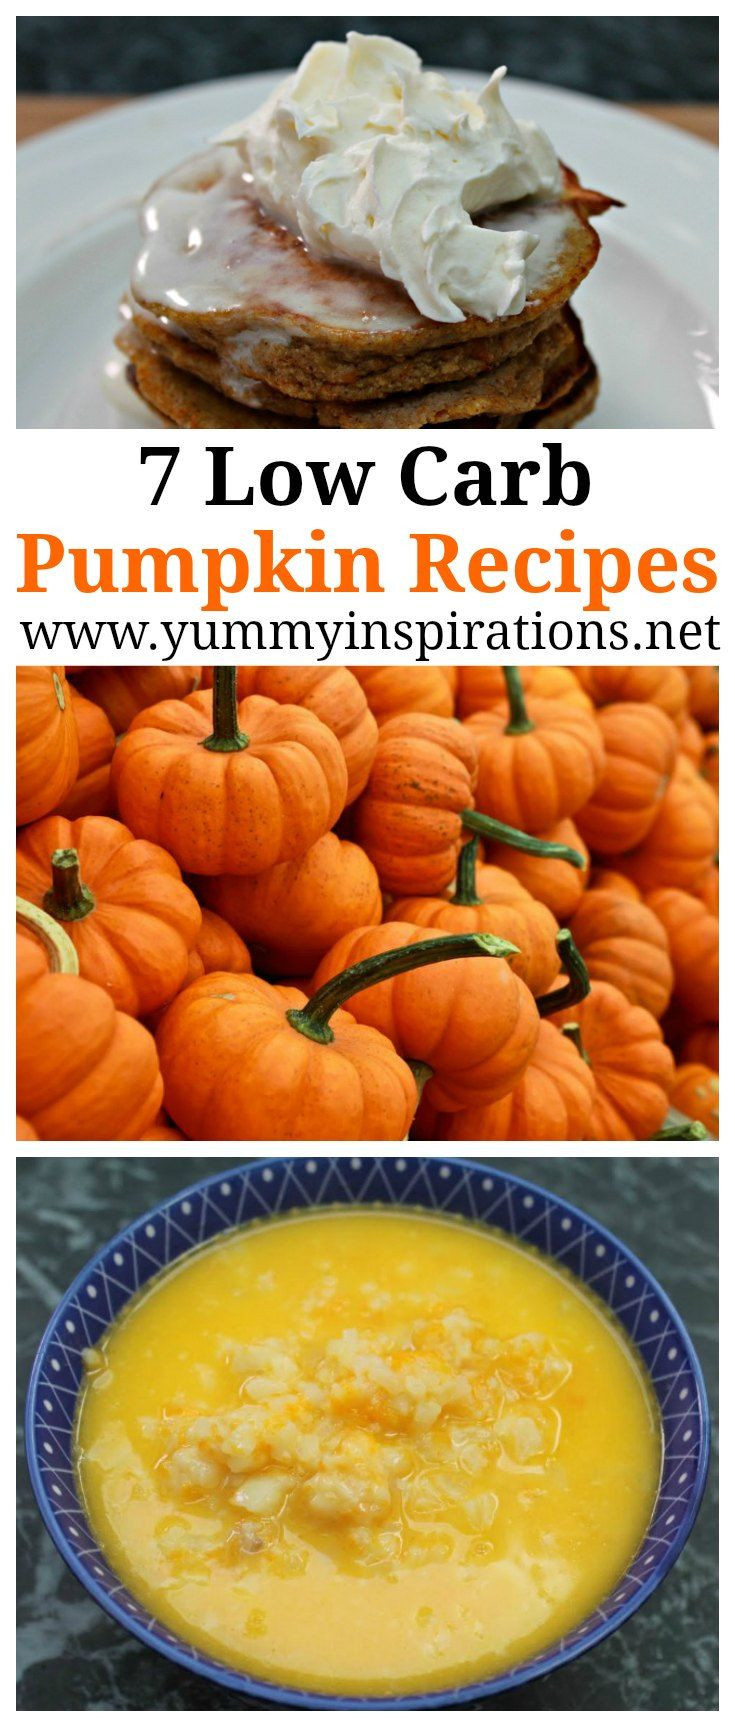 Low Carb Fall Recipes
 30 Best Low Carb Fall Recipes Most Popular Ideas of All Time